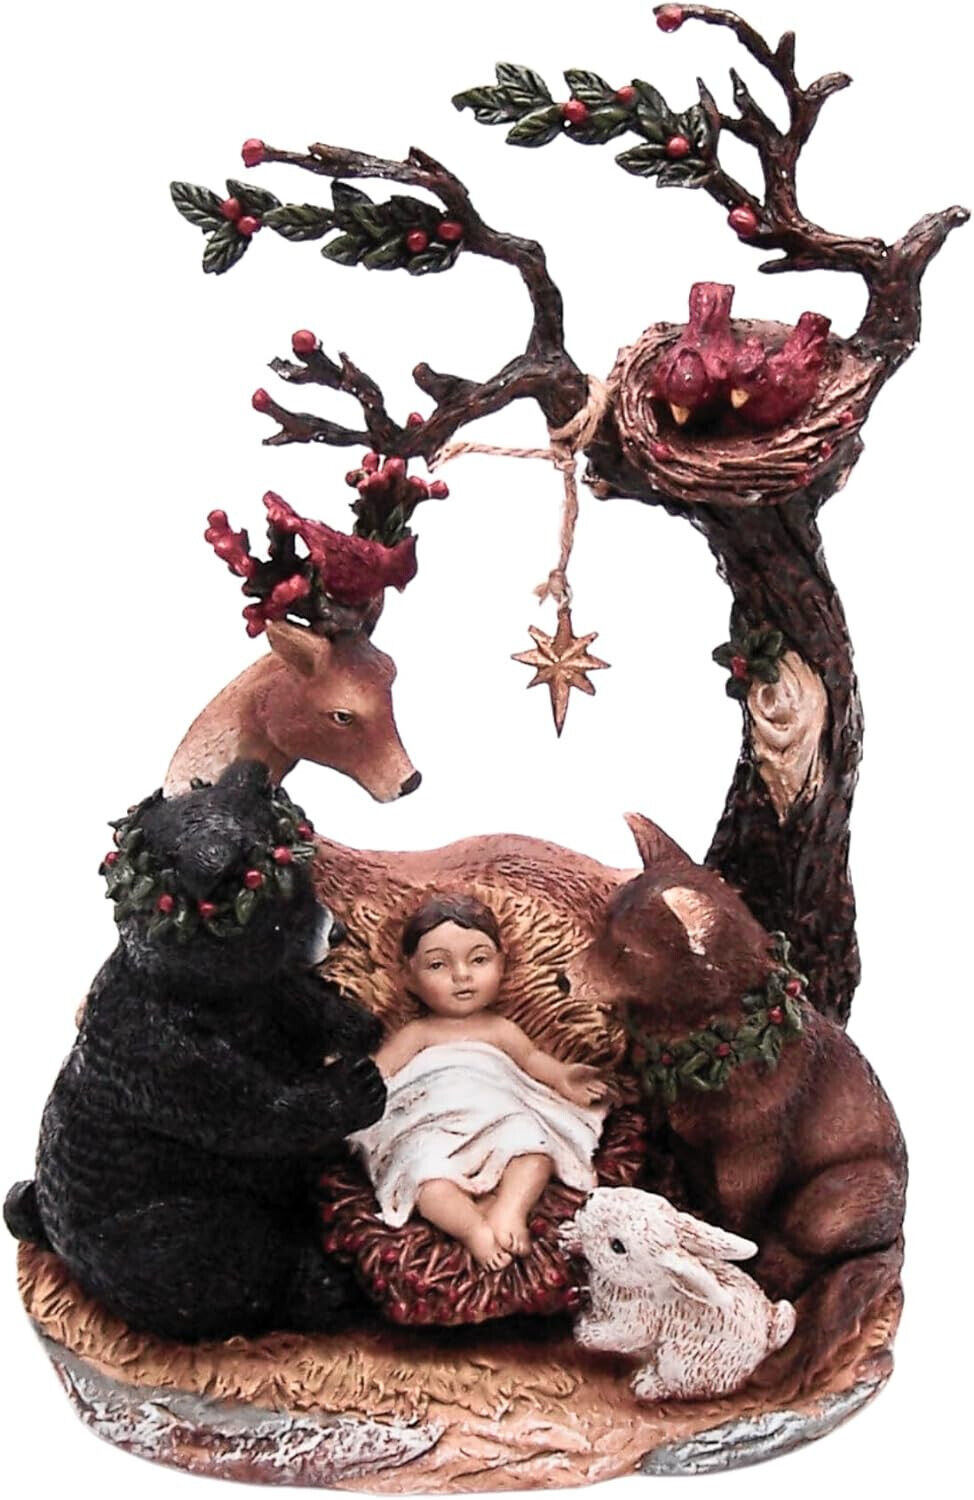 Freestanding Religious Figurine Featuring Baby Jesus Surrounded by Wildlife